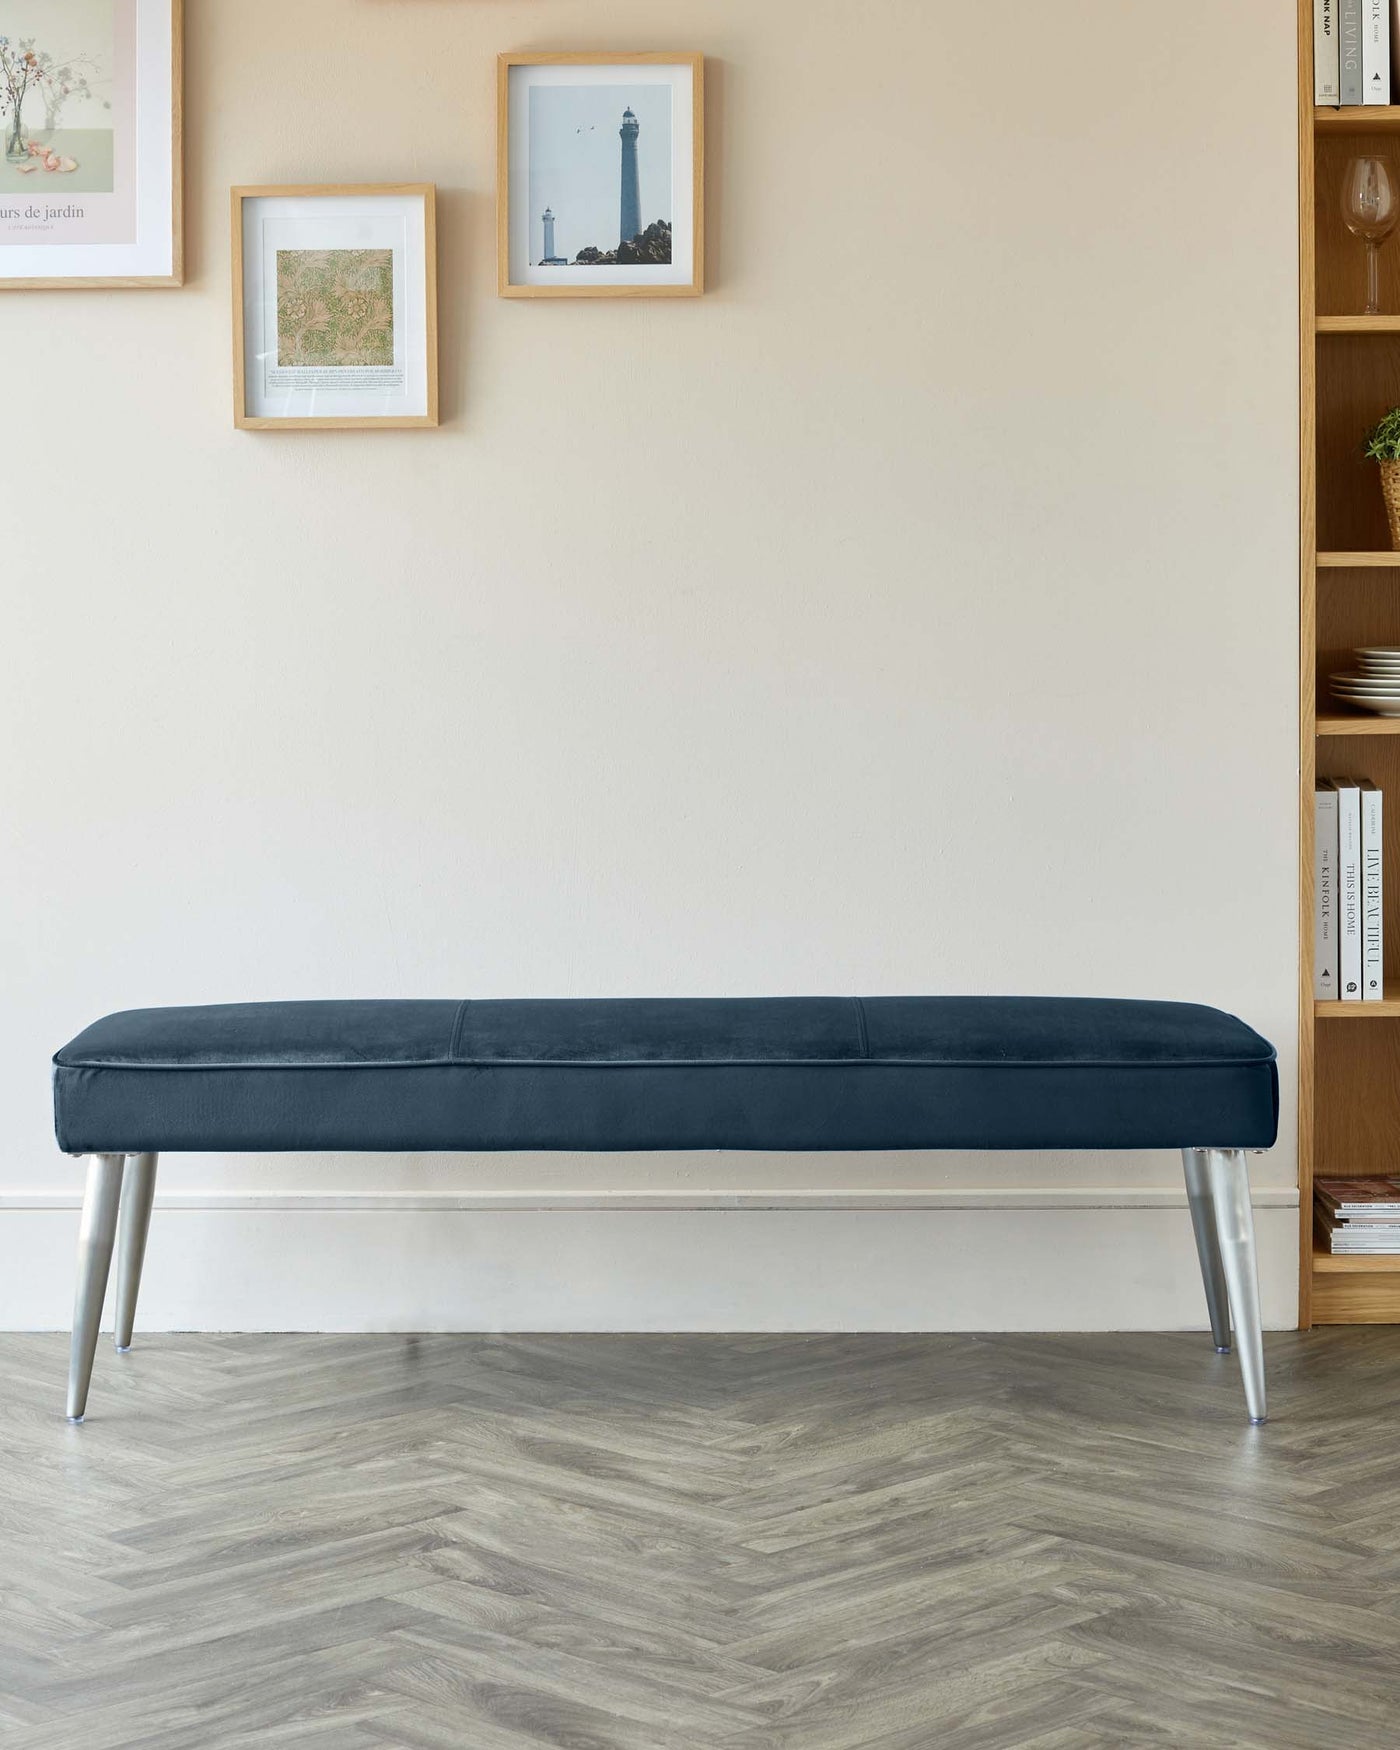 Modern minimalist upholstered bench in dark blue velvety fabric with sleek cylindrical metallic legs on a herringbone pattern wooden floor, complemented by a wooden bookshelf on the side.